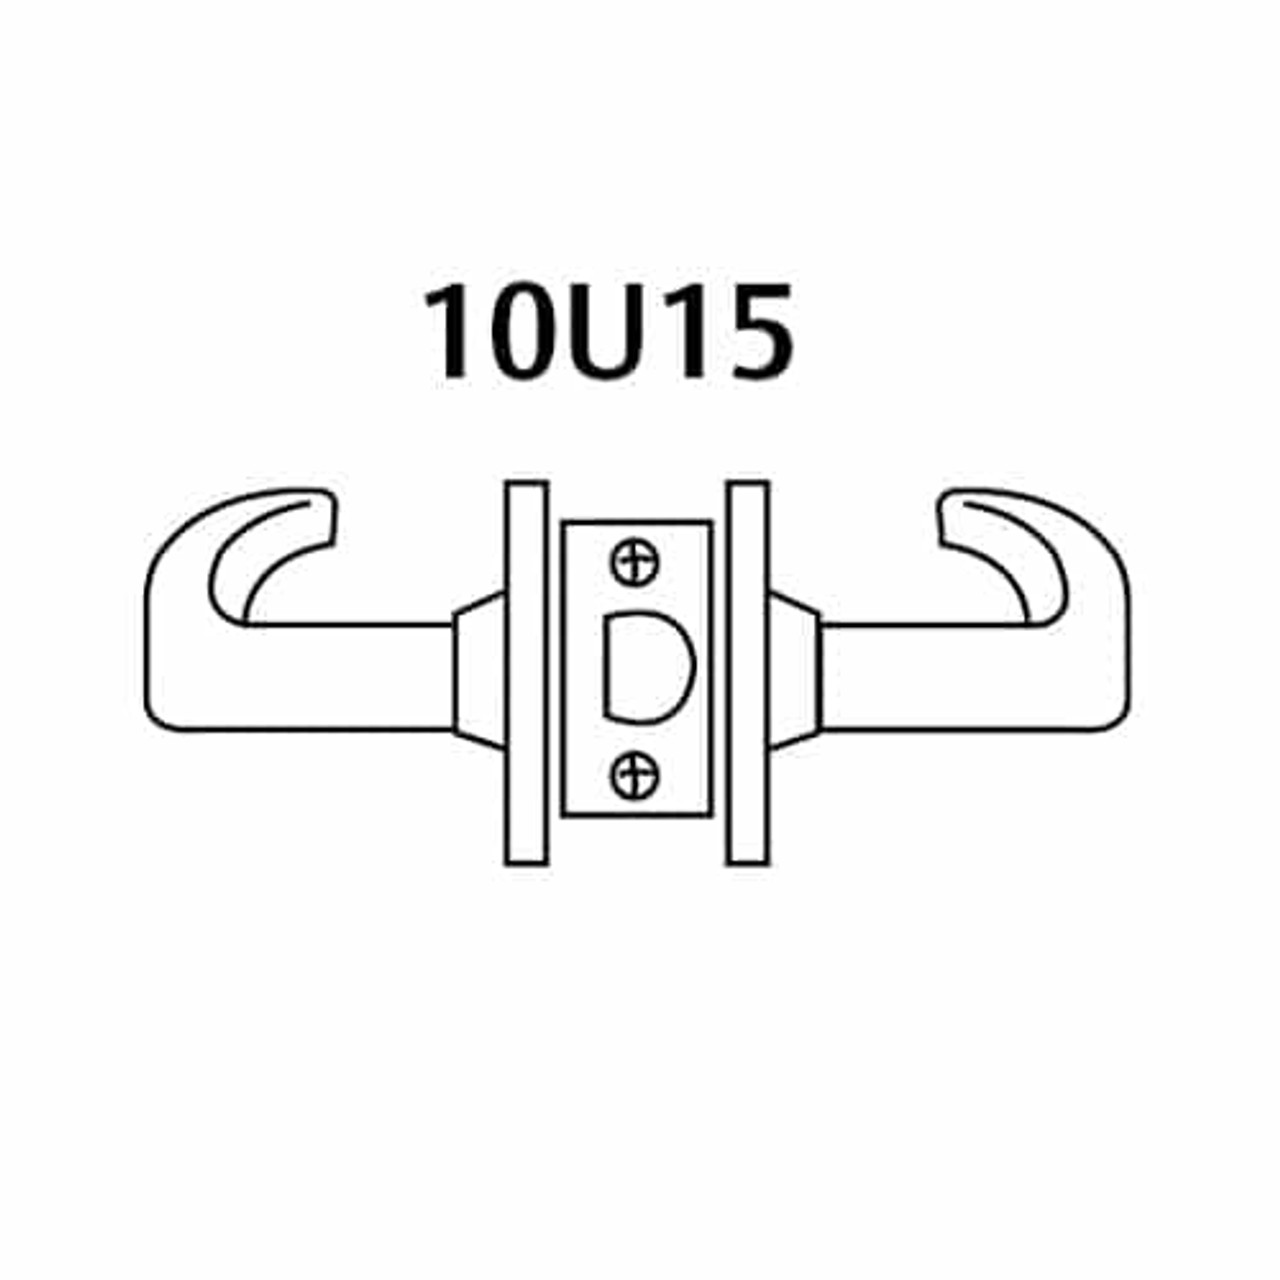 28-10U15-GB-10B Sargent 10 Line Cylindrical Passage Locks with B Lever Design and G Rose in Oxidized Dull Bronze